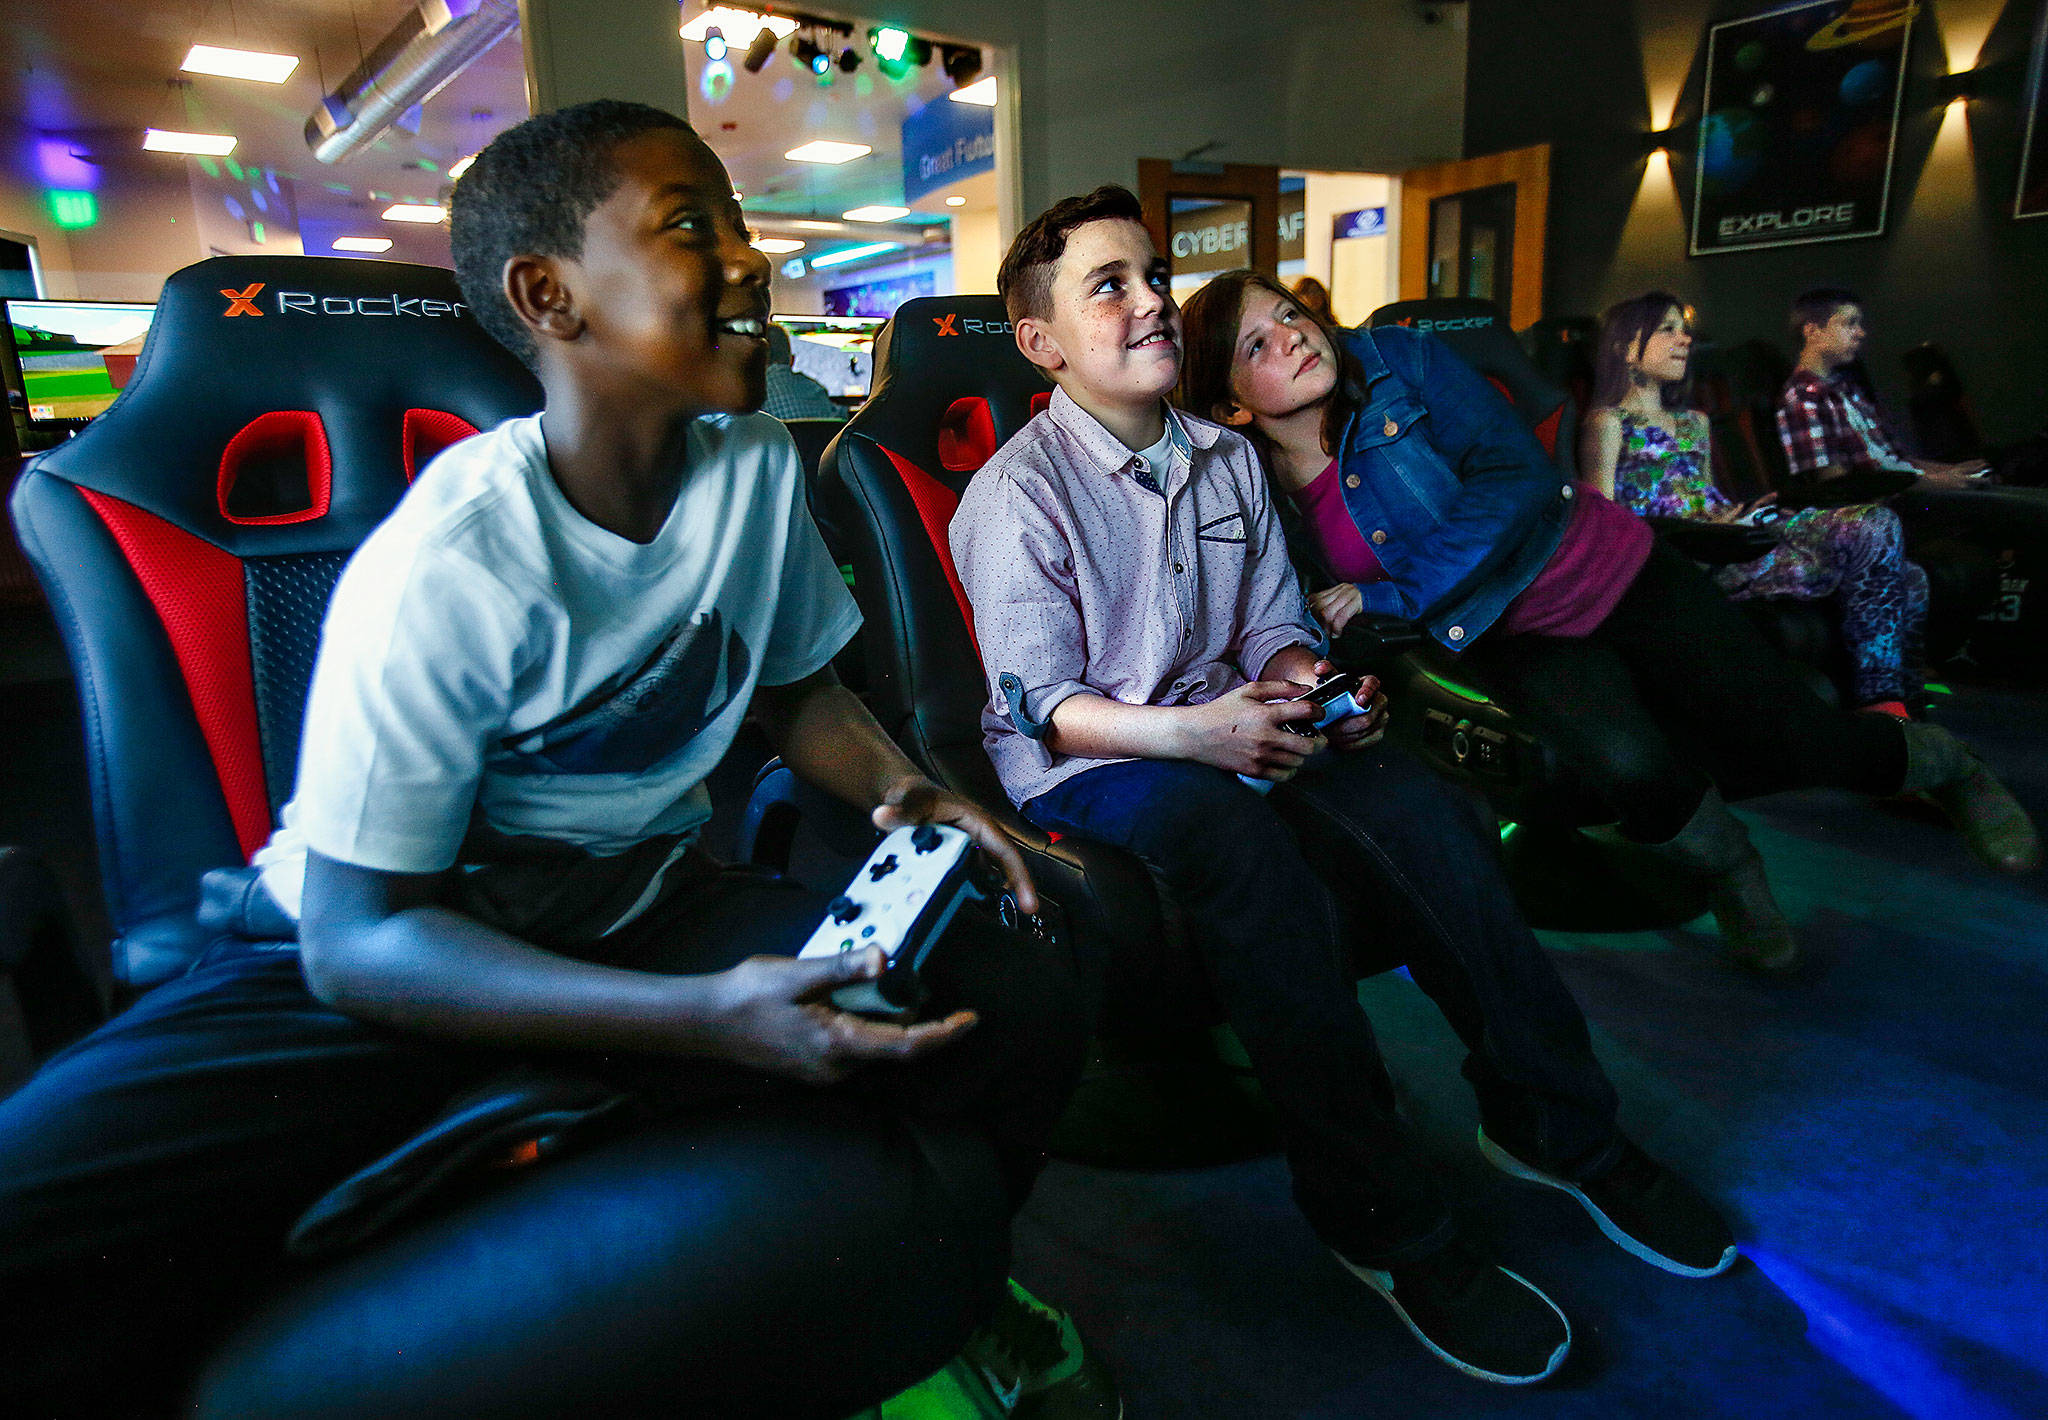 Young students, all from North Lake Middle School, enjoy video games on big screens at the new Dan Pratt Memorial Teen Center in Lake Stevens on Thursday after school let out. From left, they are Shawn Etheridge, 11, Ayden Perez, 11, Riley Gentry, 12, Reegan Pauley, 11, and Brendon Bade, 12. (Dan Bates / The Herald)